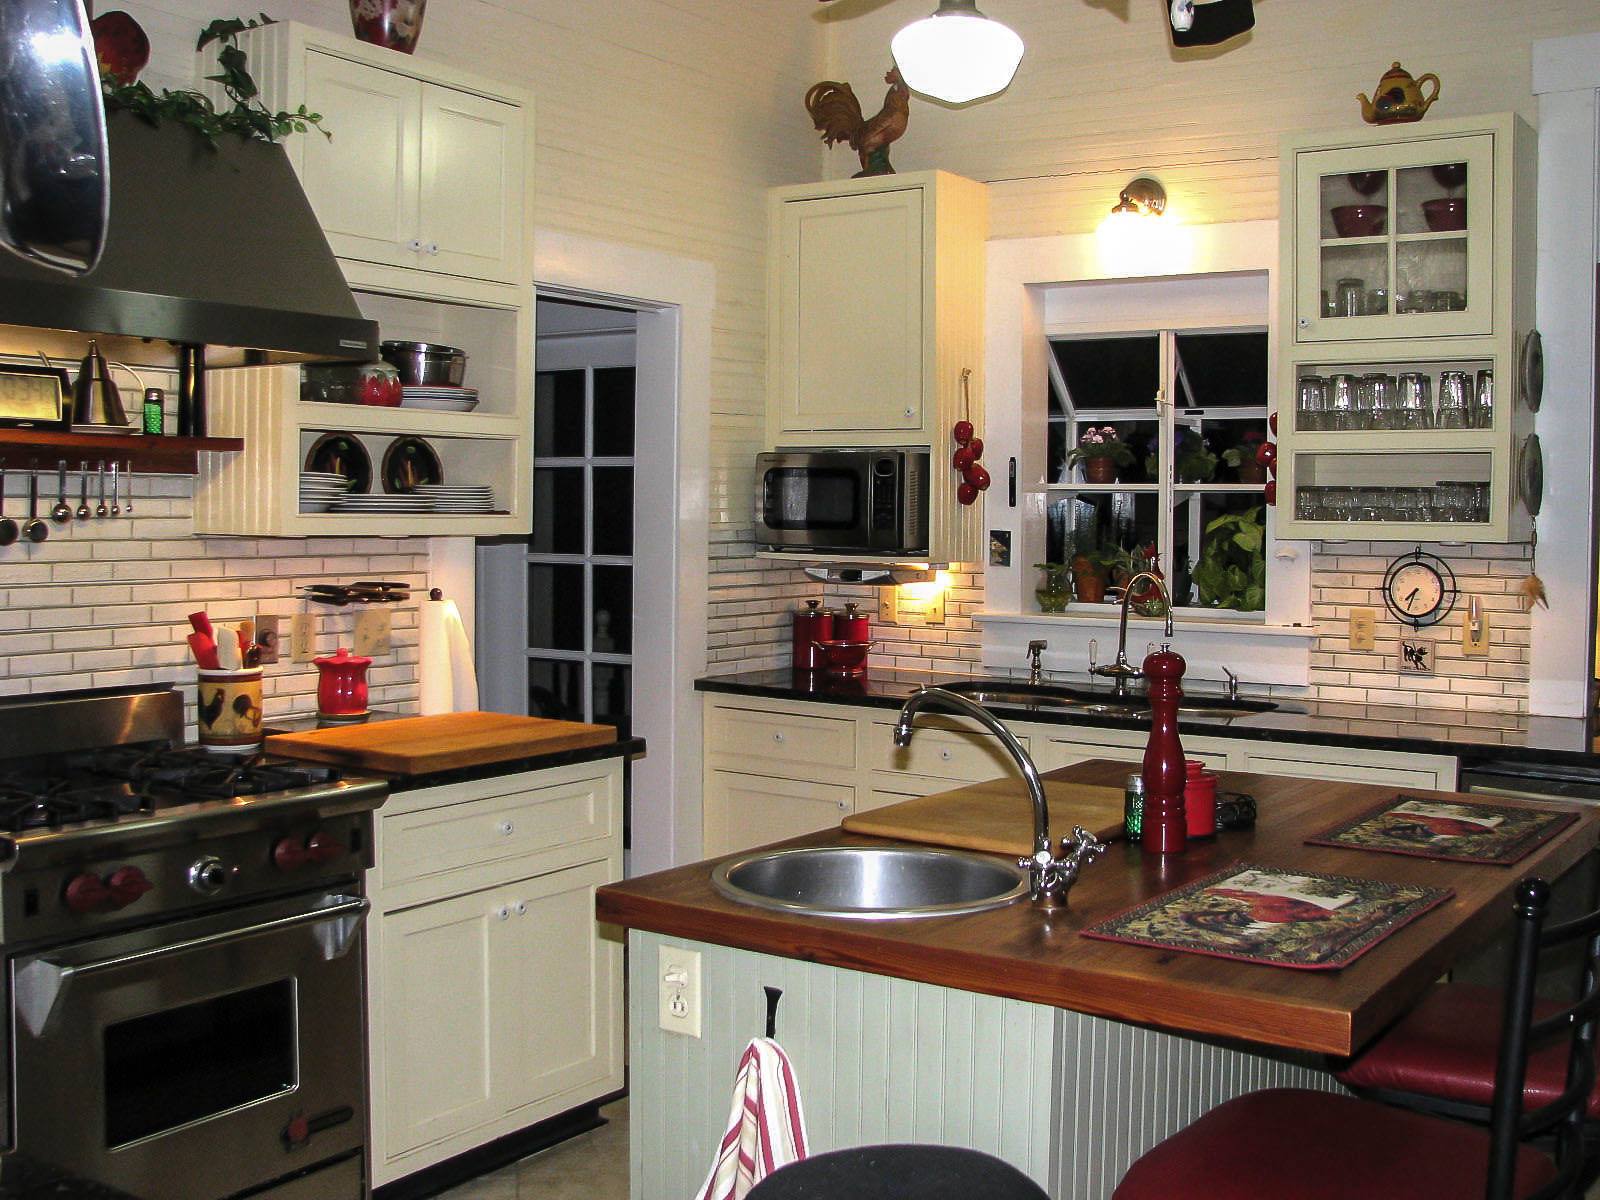 Avail Kitchen Installation Services From Top Contractors To Have A Dream Kitchen